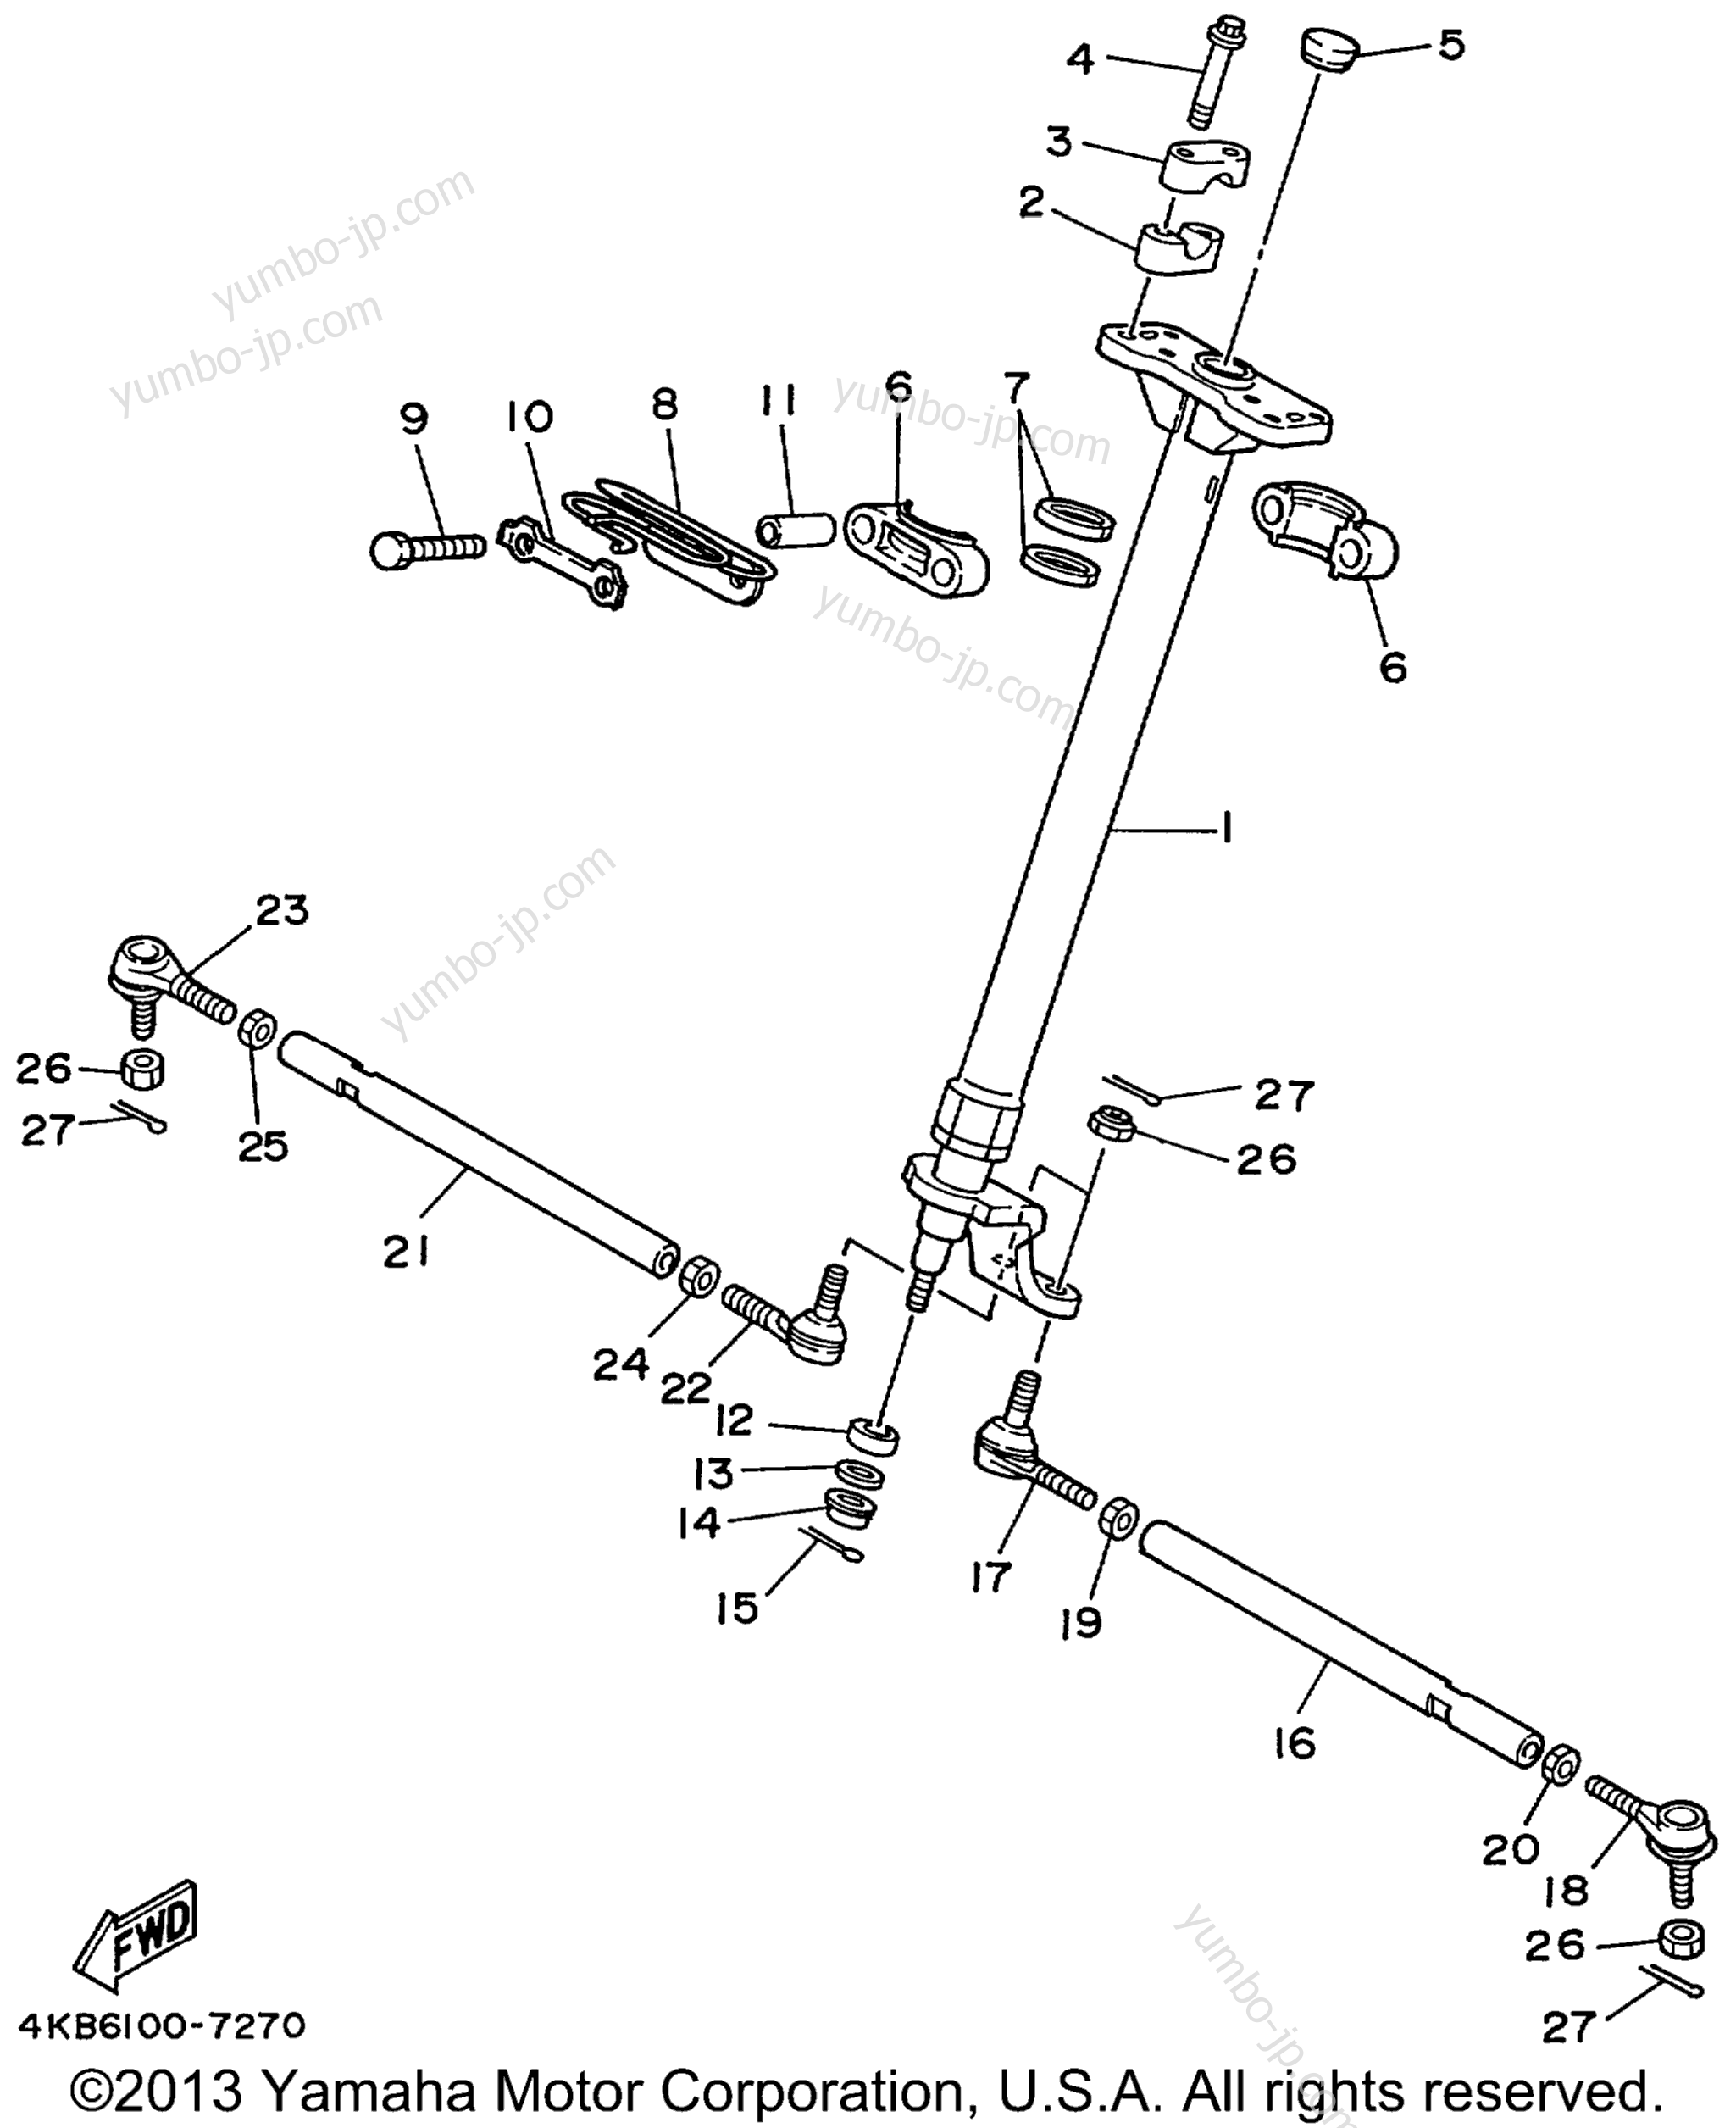 Steering for ATVs YAMAHA WOLVERINE 4WD (YFM350FXL) 1999 year